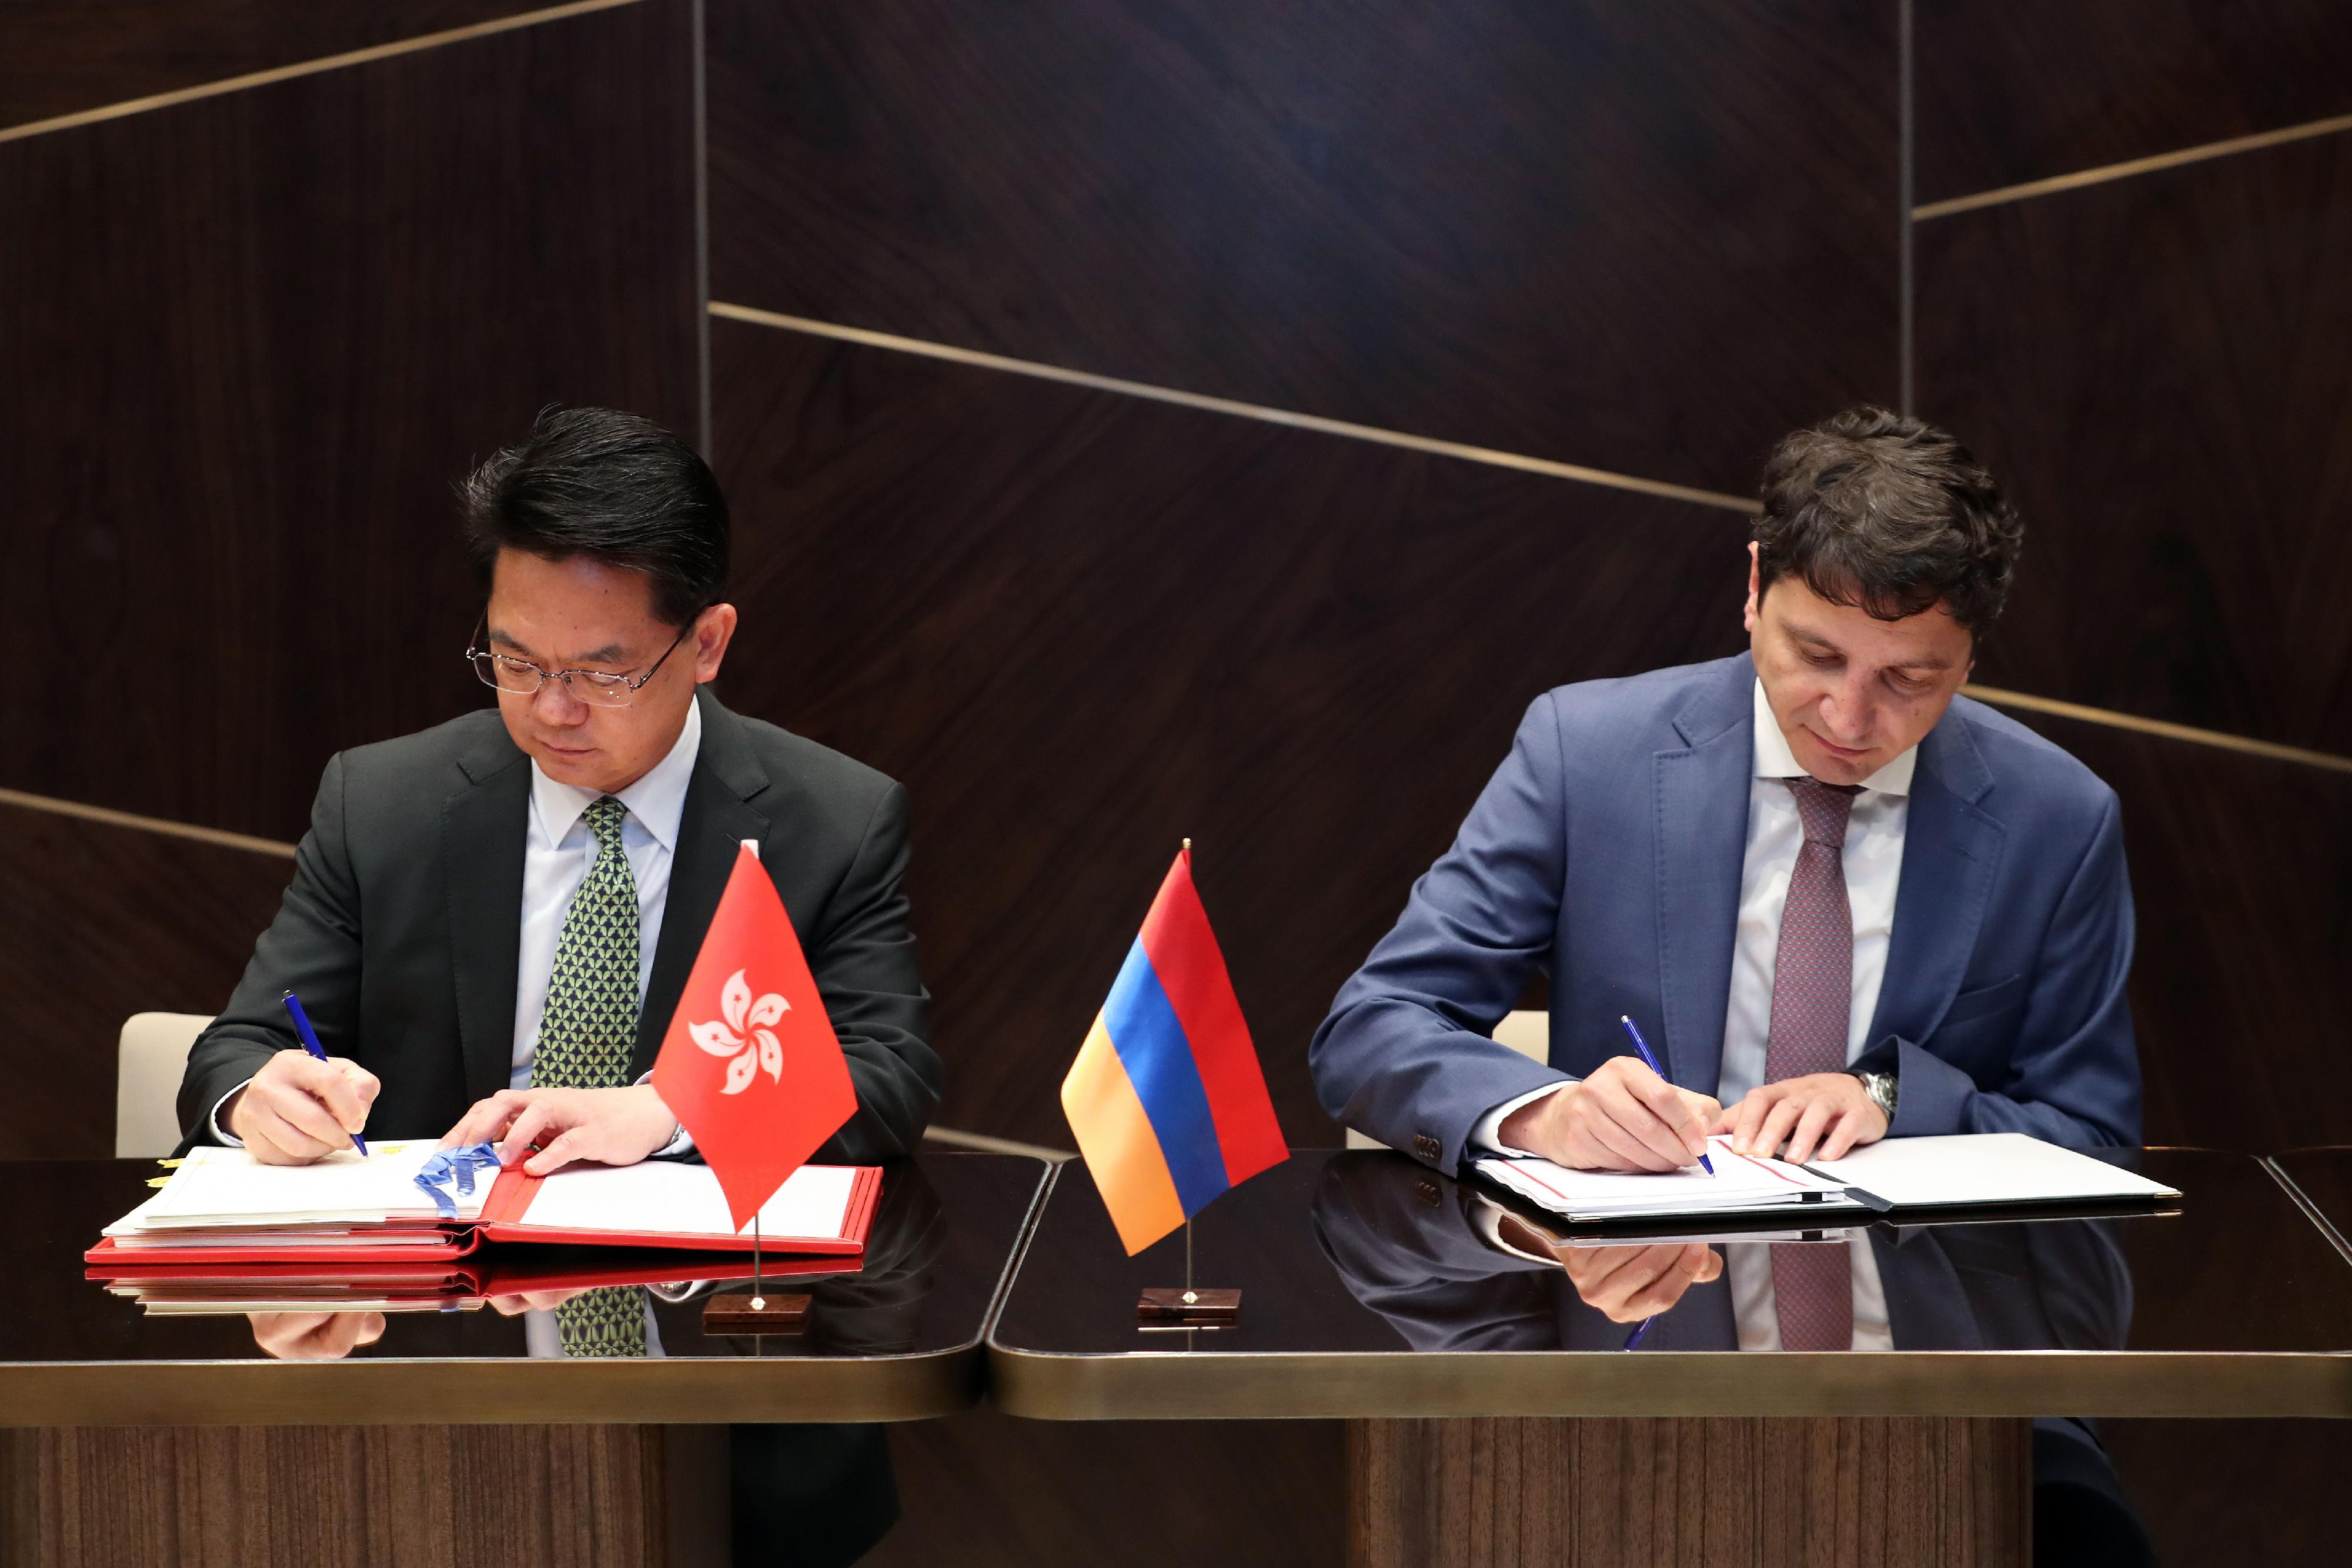 The Commissioner of Inland Revenue, Mr Tam Tai-pang (left), and the Minister of Finance of Armenia, Mr Vahe Hovhannisyan (right), today (June 24, Yerevan time) sign a comprehensive avoidance of double taxation agreement in Yerevan.